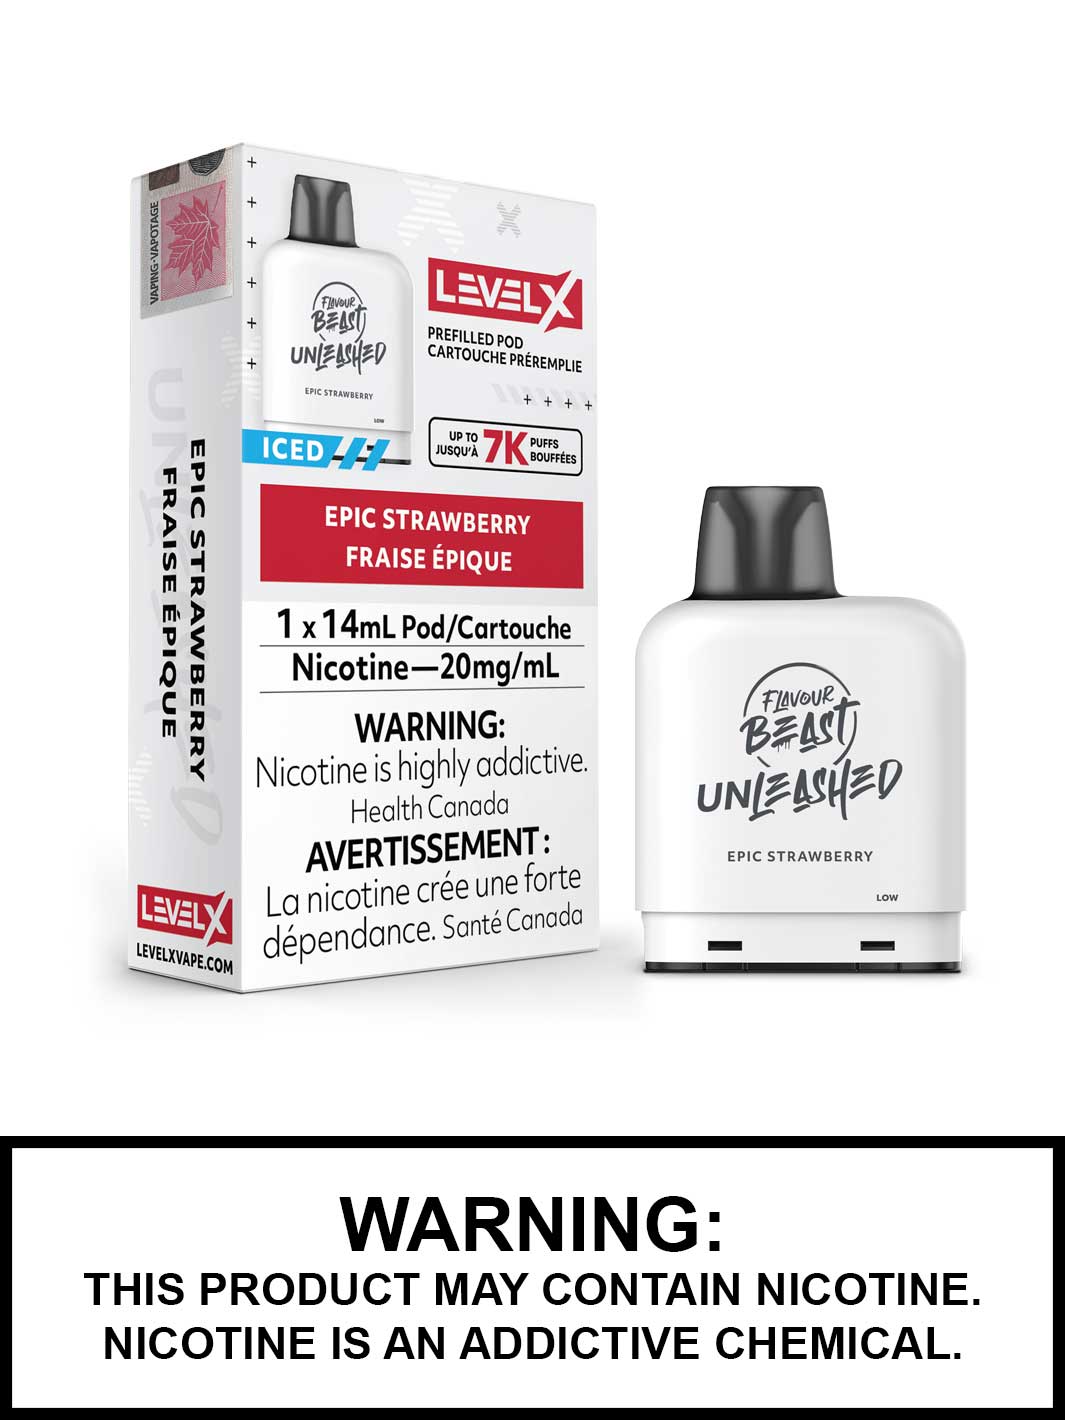 Epic Strawberry Iced Level X Flavour Beast Unleashed Pods, Vape360 Canada